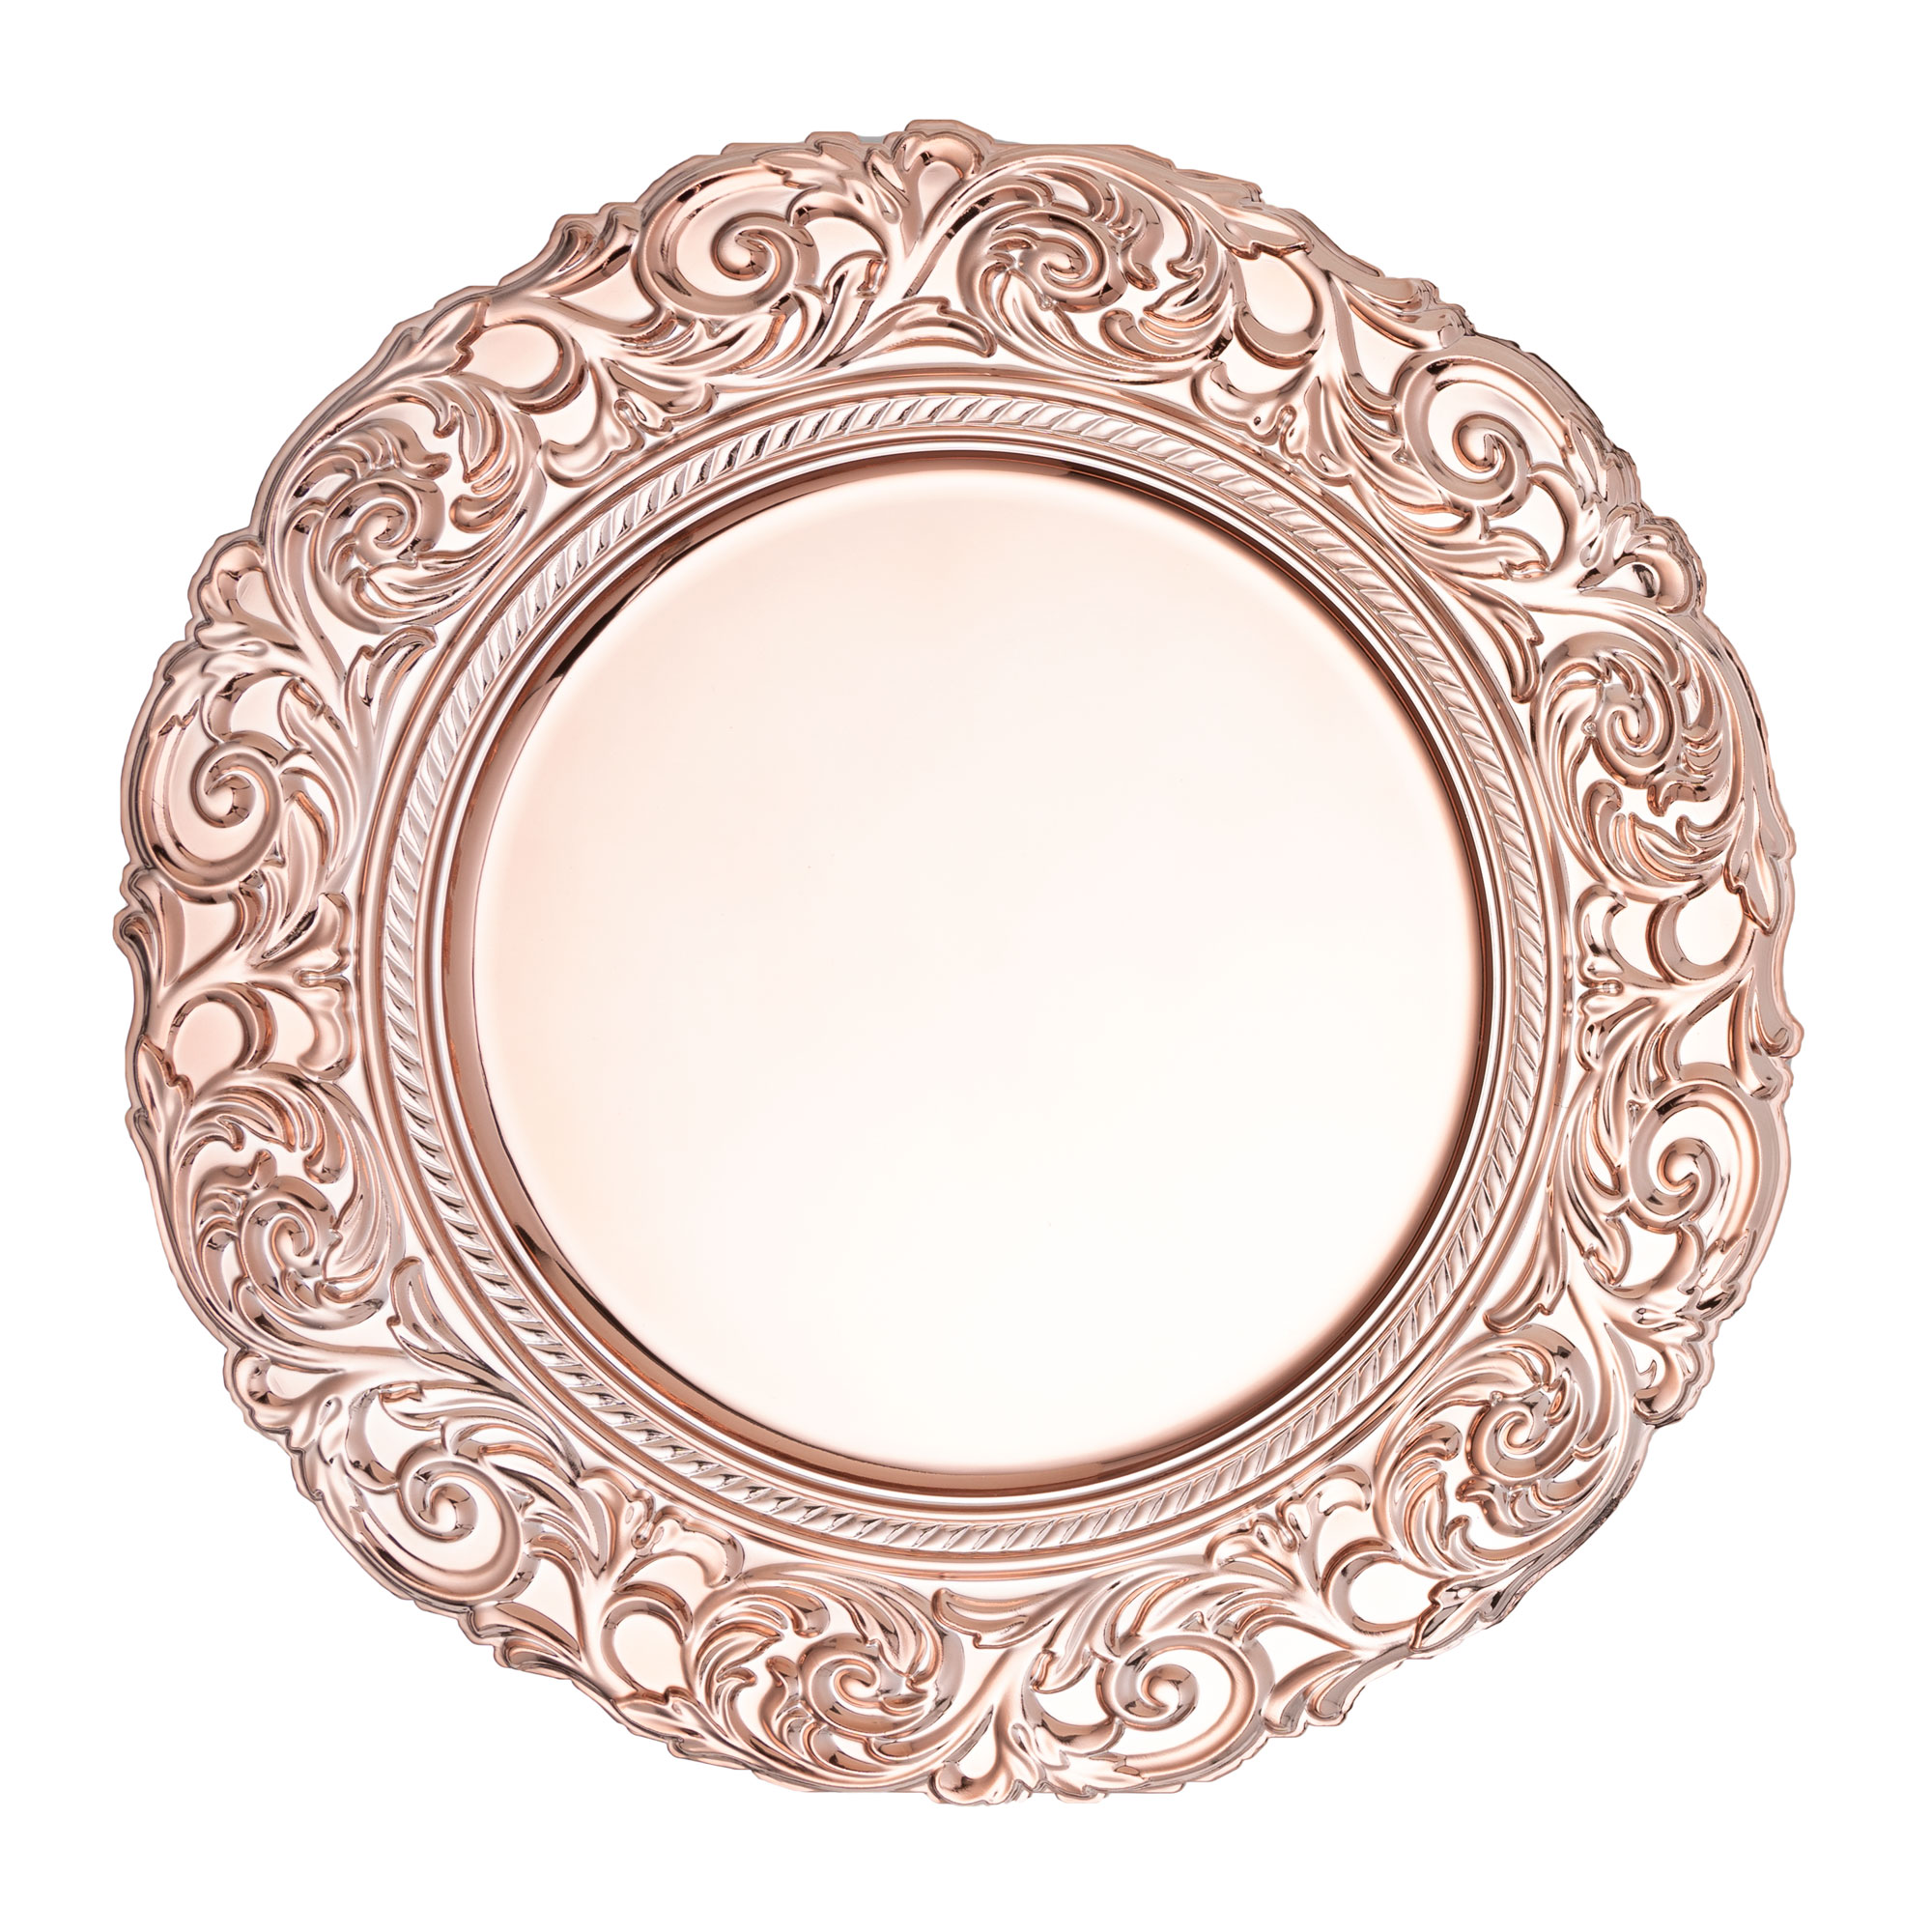 Baroque Plastic Charger Plate With Filigree Rim 14" - Rose Gold